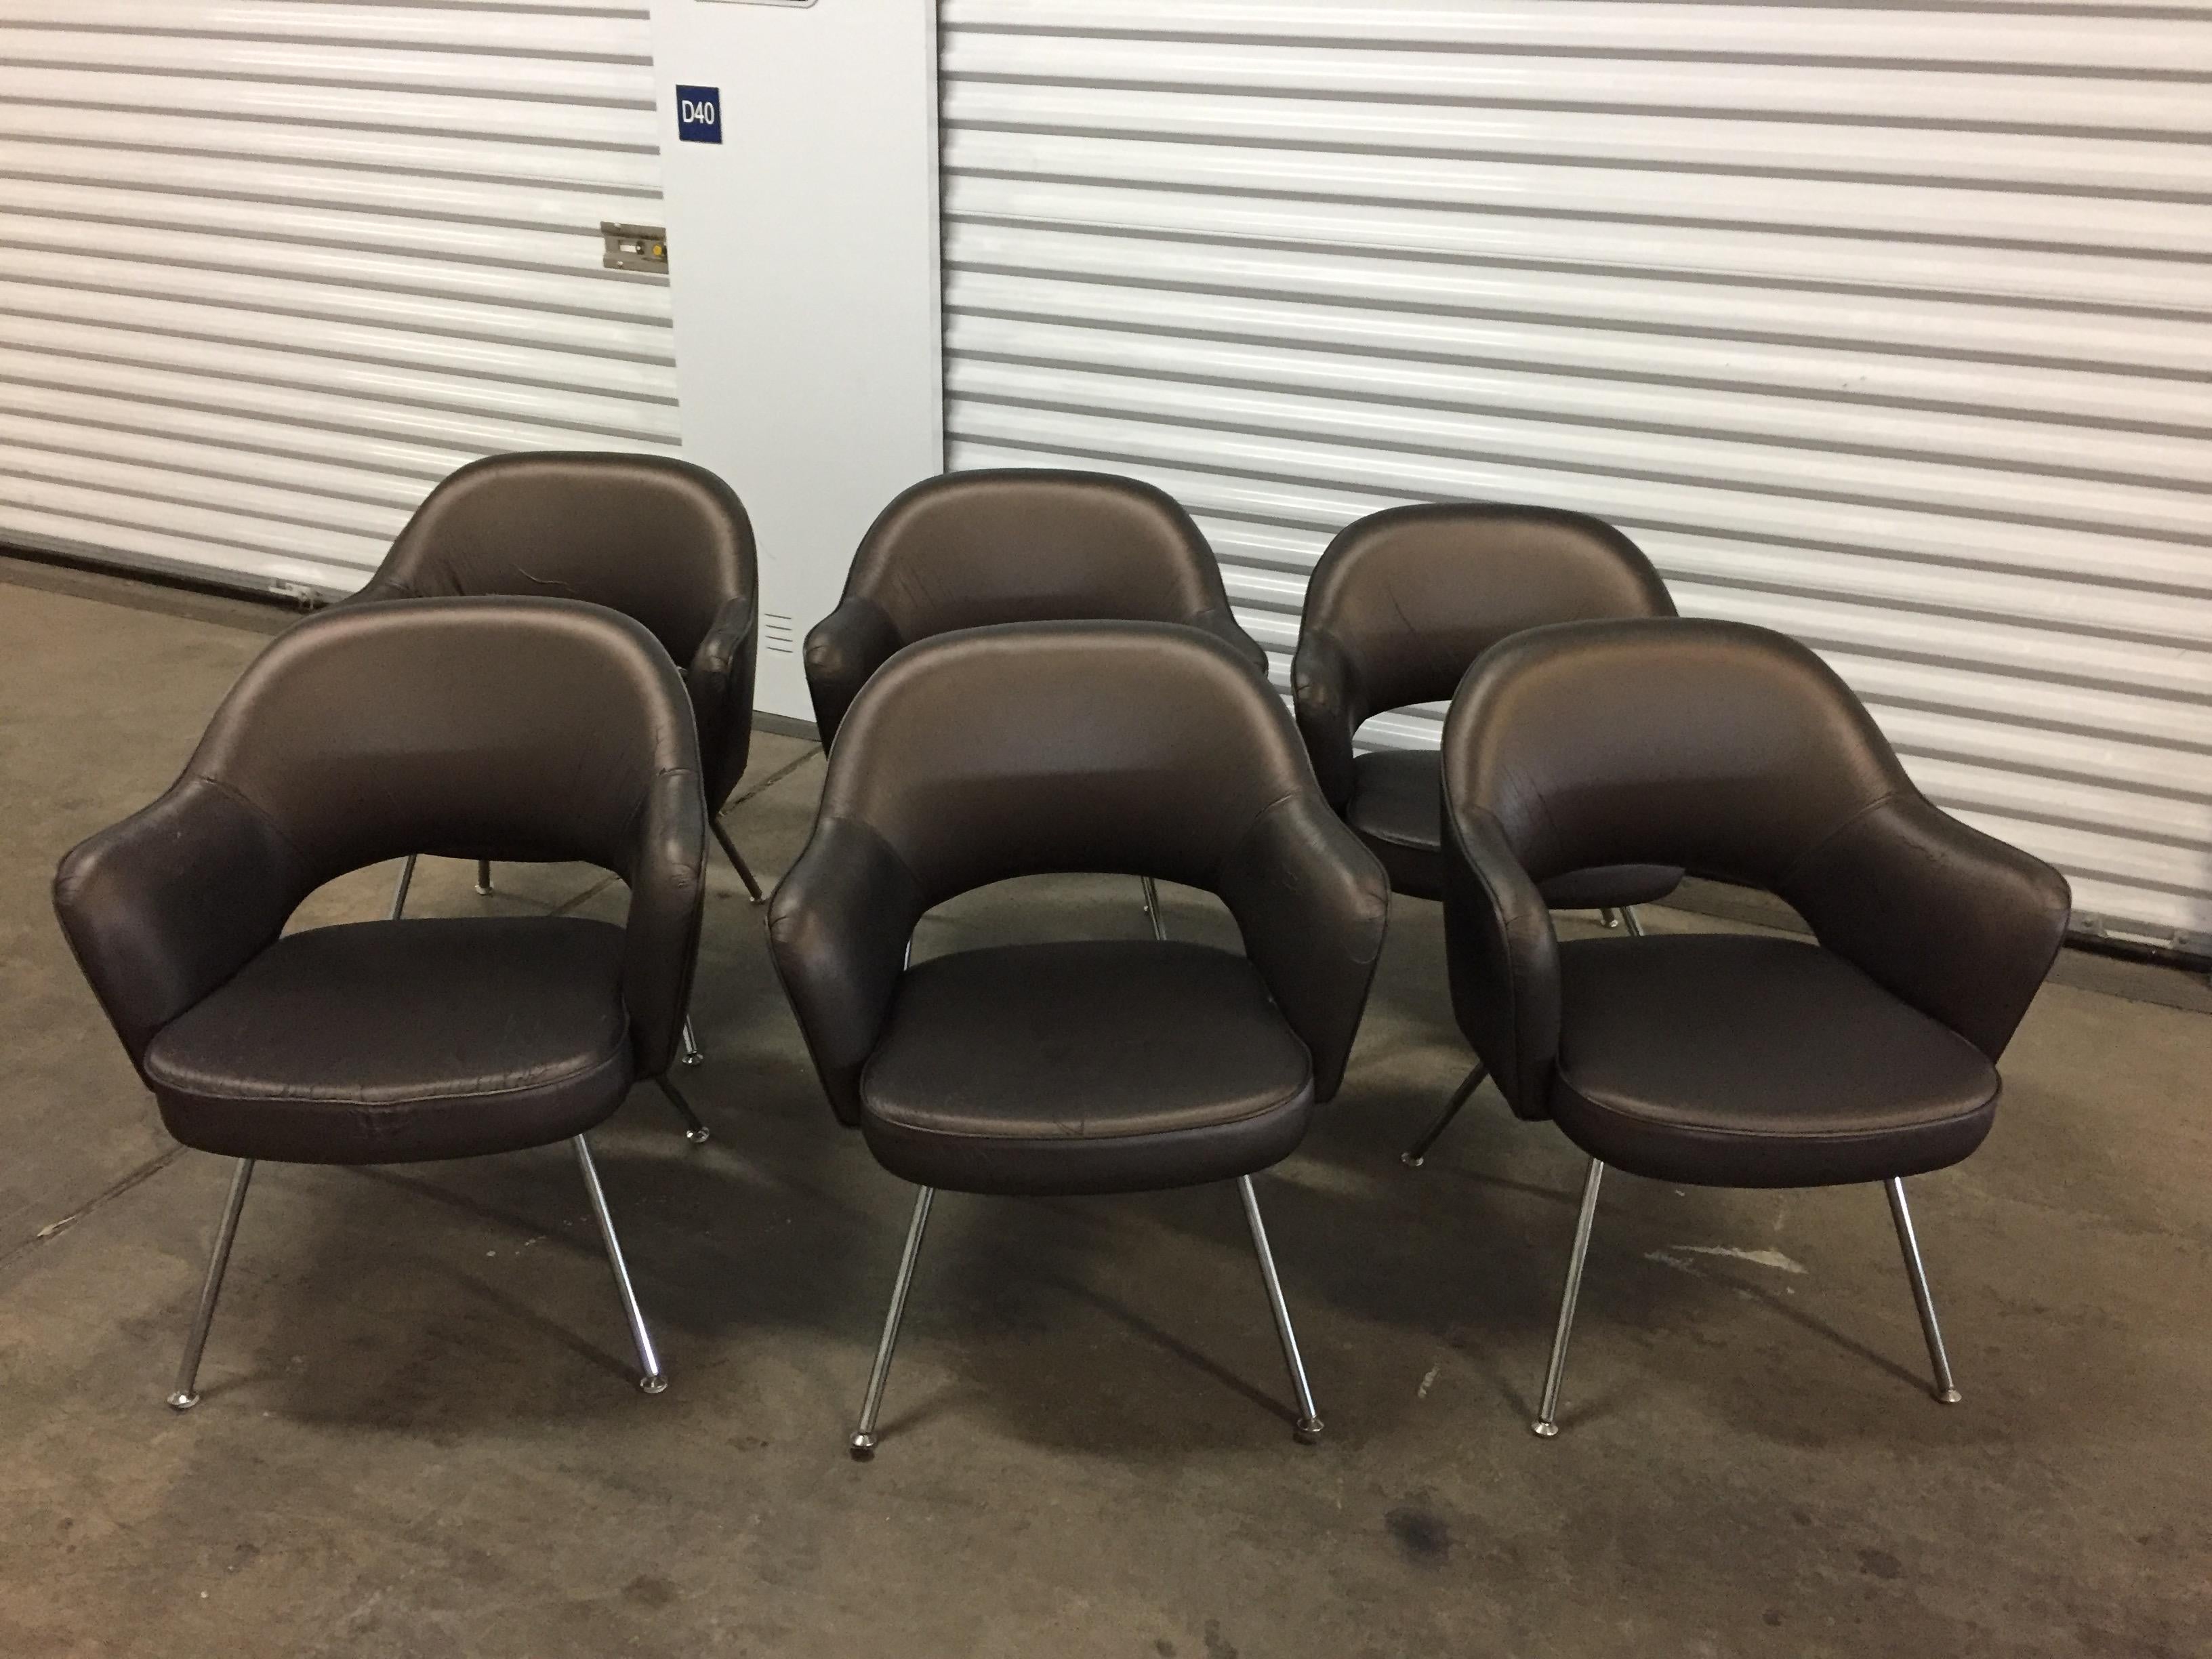 1975 Knoll Saarinen executive dining or office chairs
Purchased from a Knoll dealer, these incredible executive chairs are the real deal!

reupholstered in vinyl by knoll's certified upholstery shop, there are a couple of places on one of the chairs